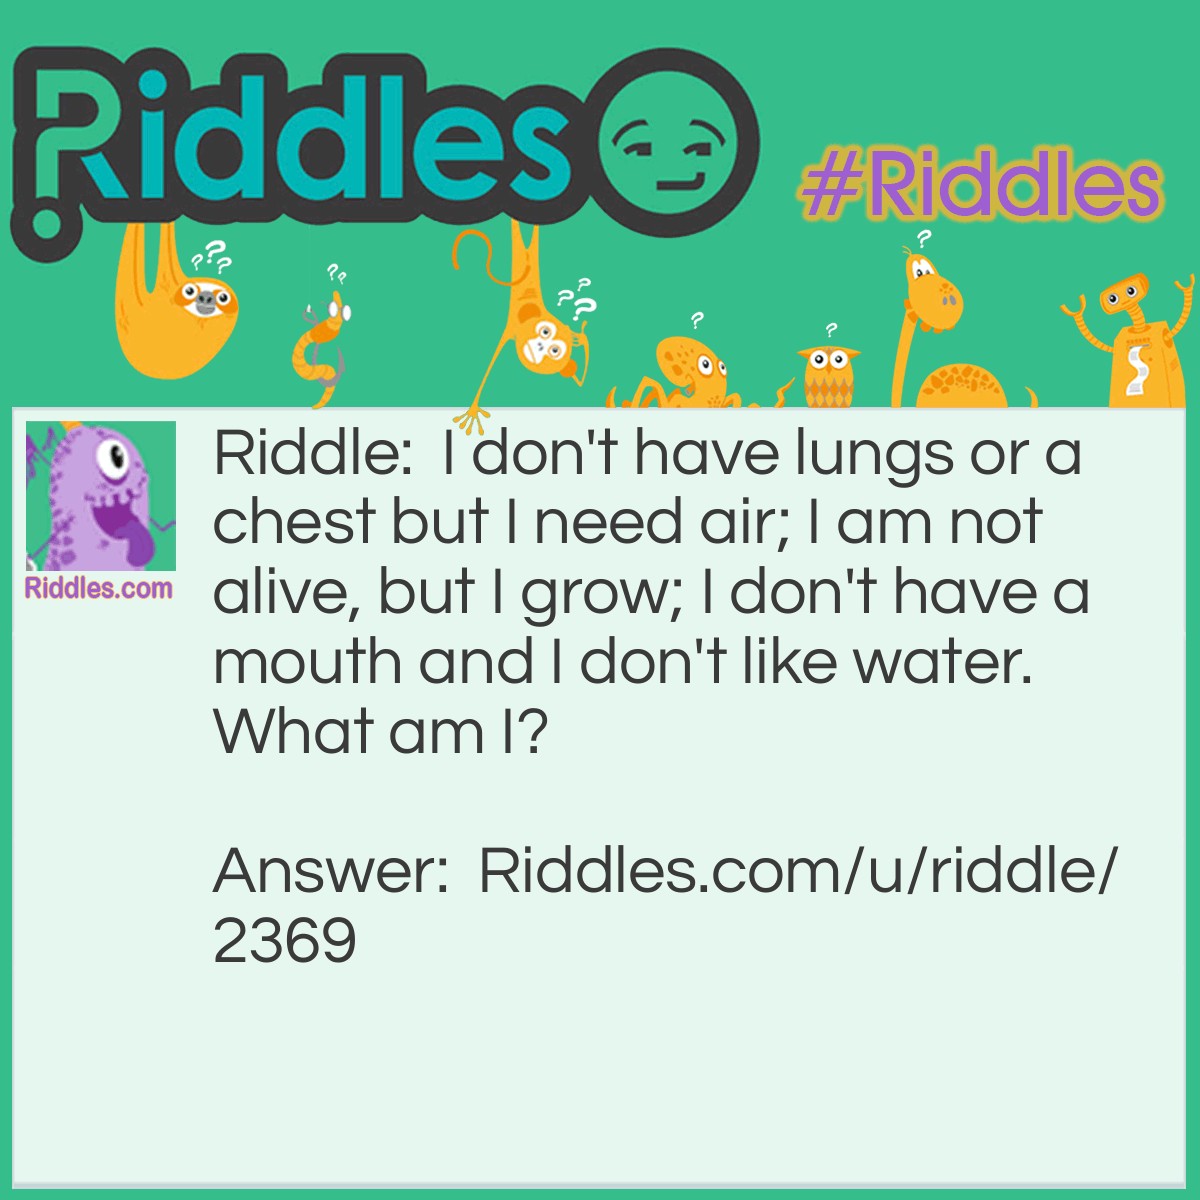 Riddle: I don't have lungs or a chest but I need air; I am not alive, but I grow; I don't have a mouth and I don't like water. What am I? Answer: Fire.